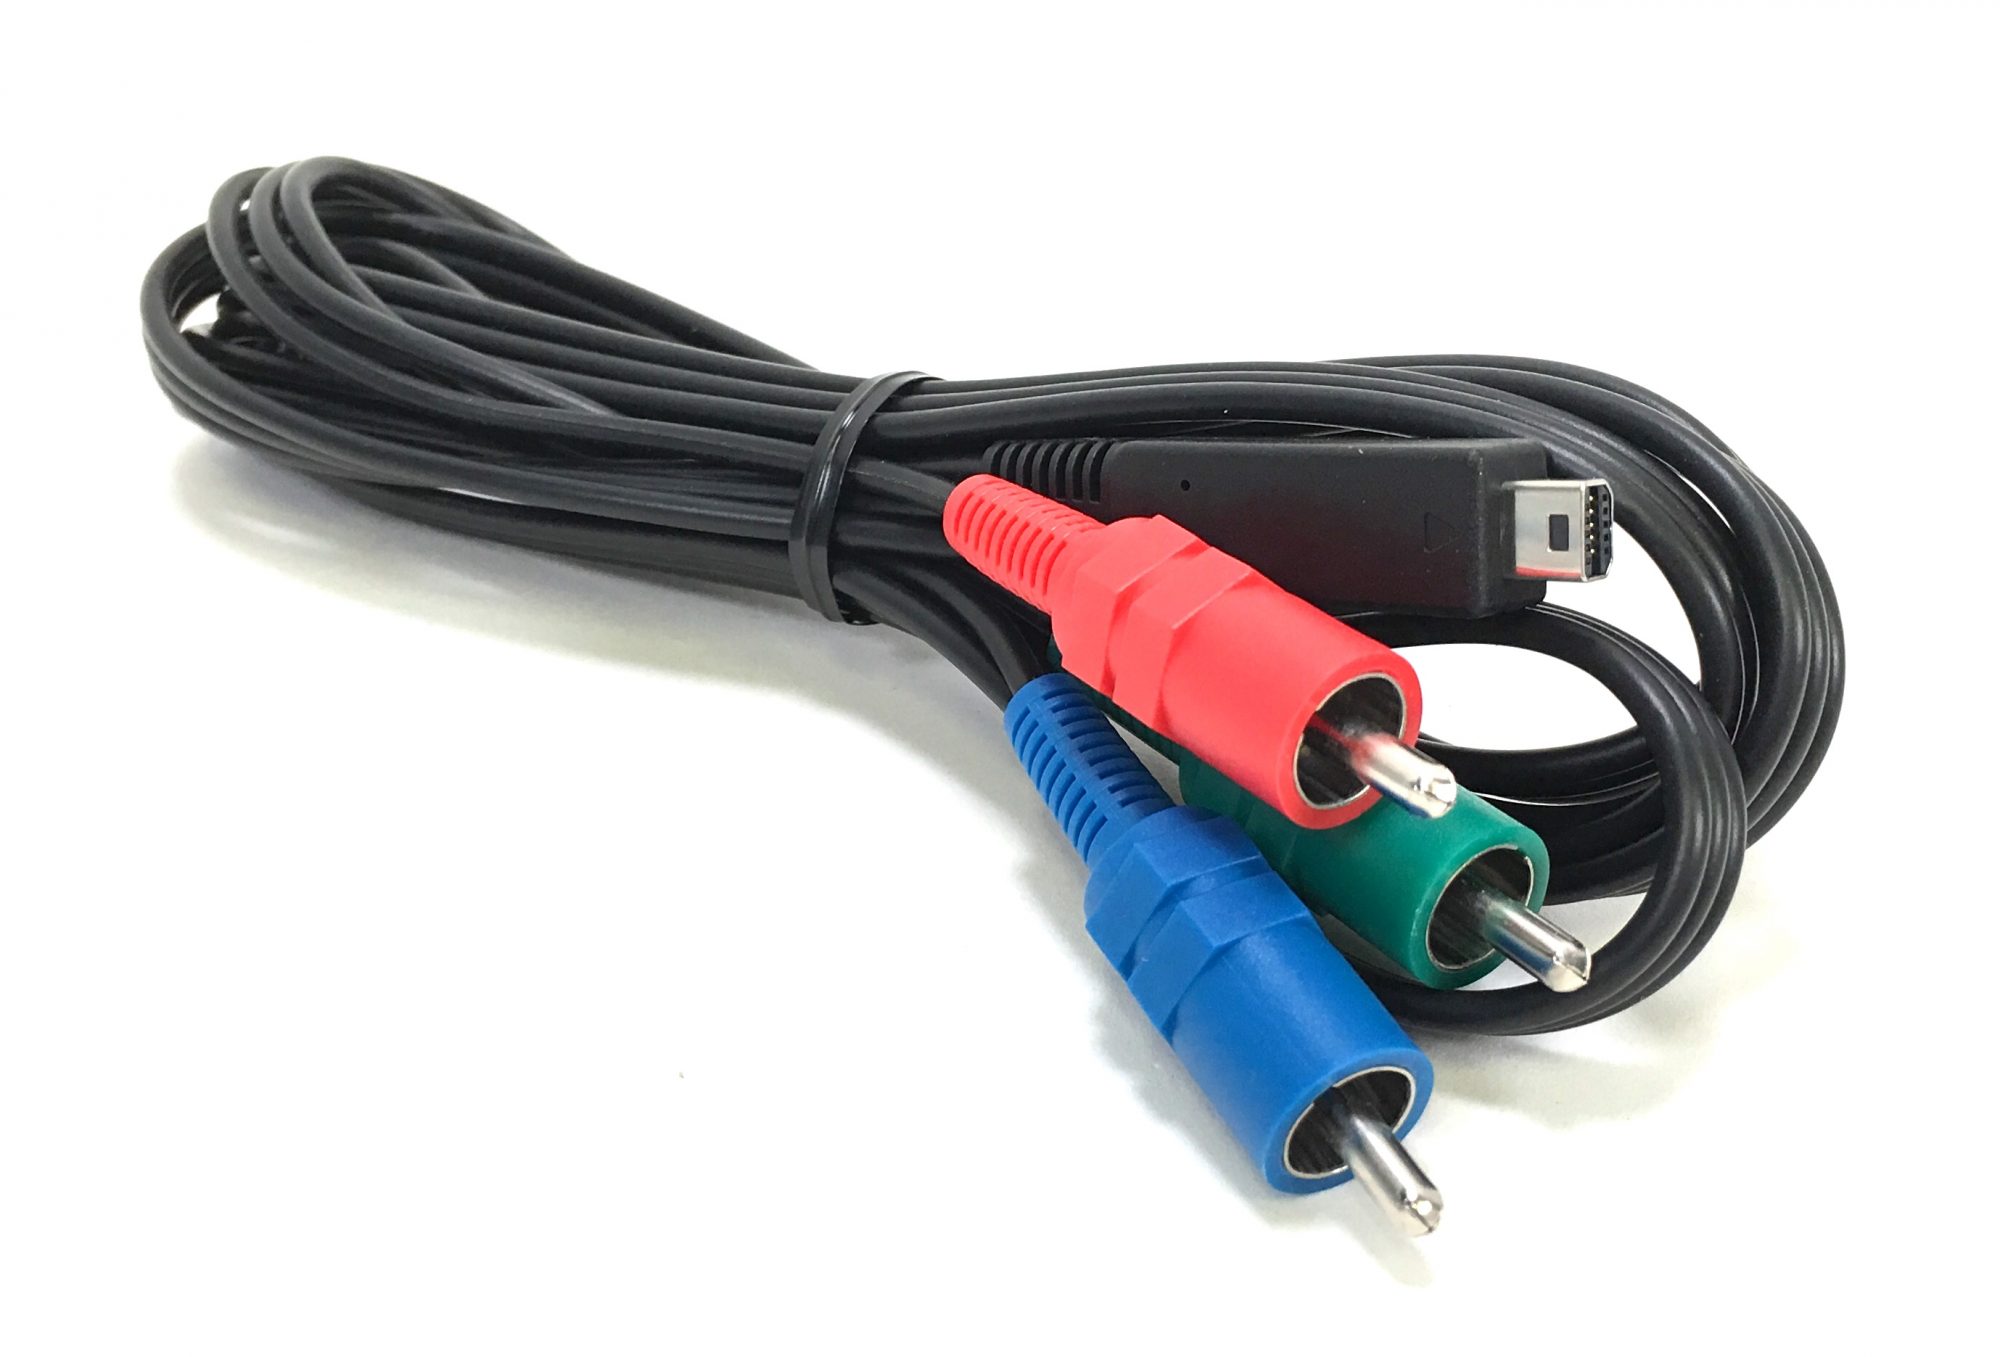 Original Component Video Cable that came with the Sony HDR-FX7 camcorder. It is a genuine Sony part, sourced directly from Sony USA. Brand new factory fresh. Free Shipping.